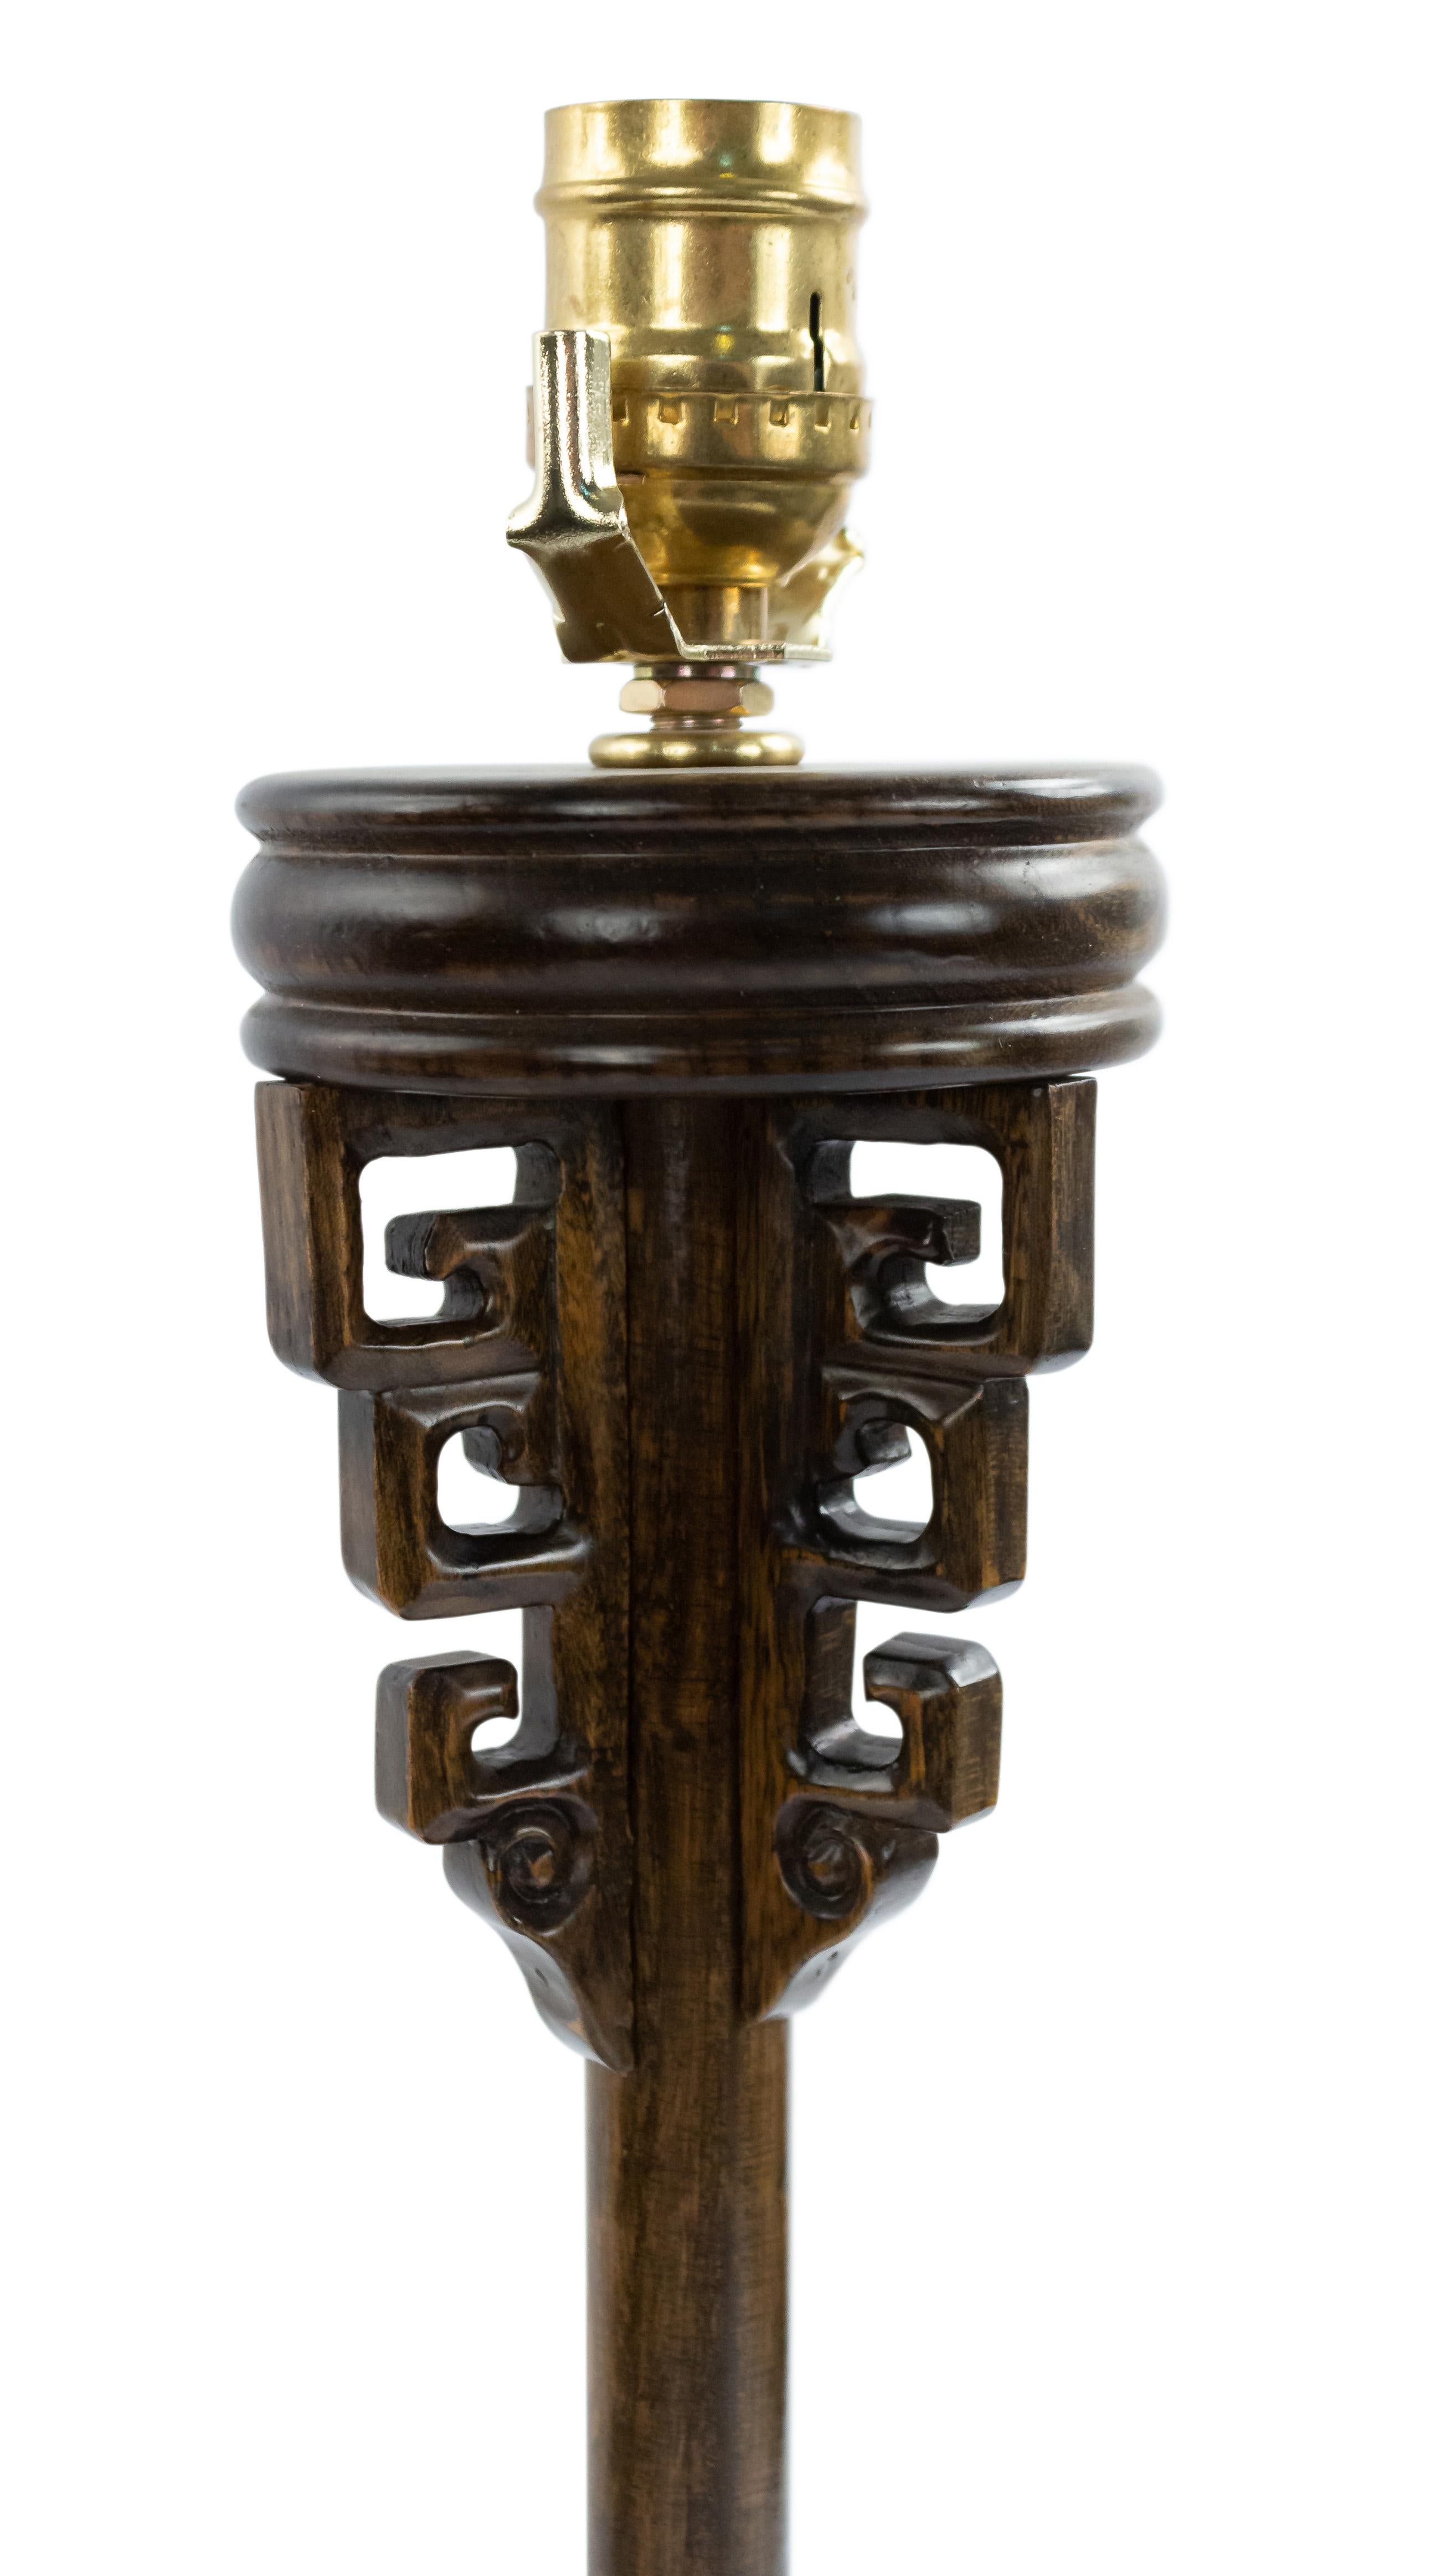 Vintage mid-century Chinese style wood lamp with fretwork design carving.